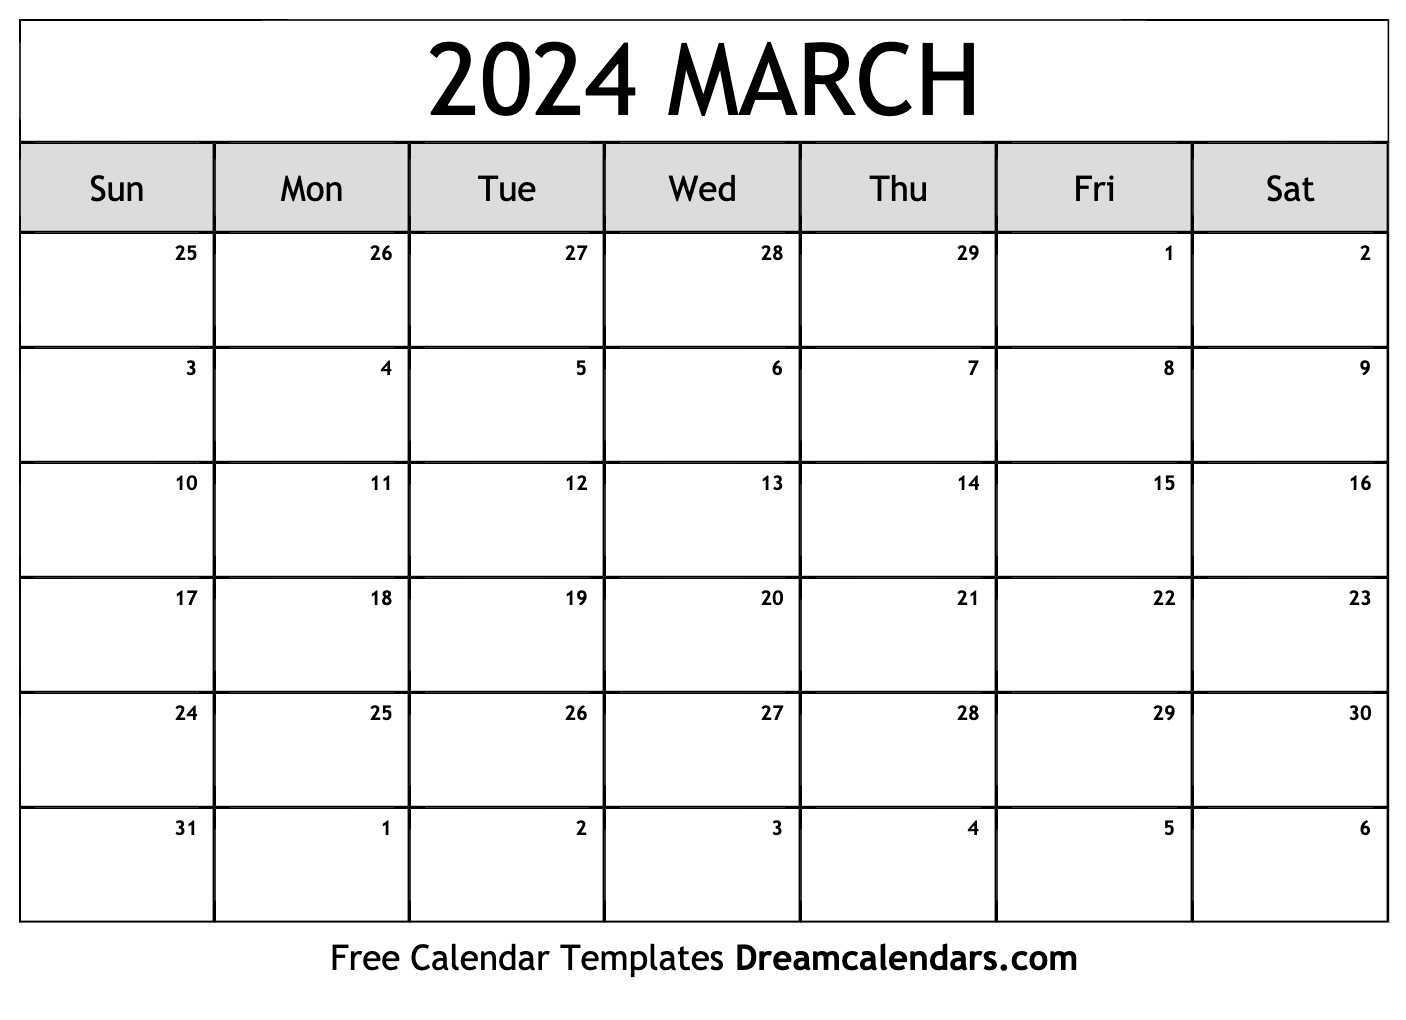 March 2024 Calendar | Free Blank Printable With Holidays for Blank March Calendar 2024 Printable